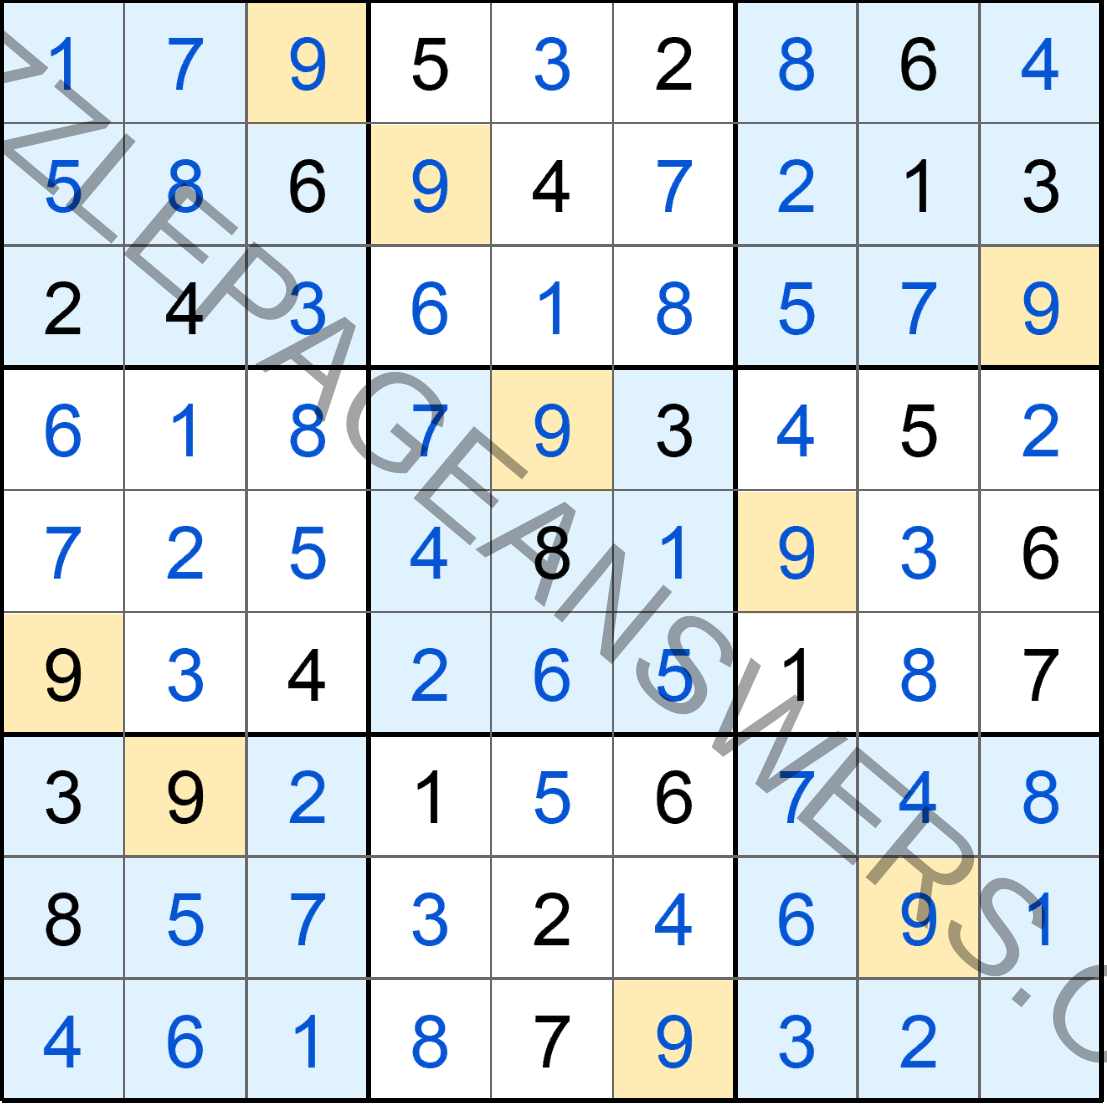 Puzzle Page Sudoku December 8 2020 Answers Puzzle Page Answers